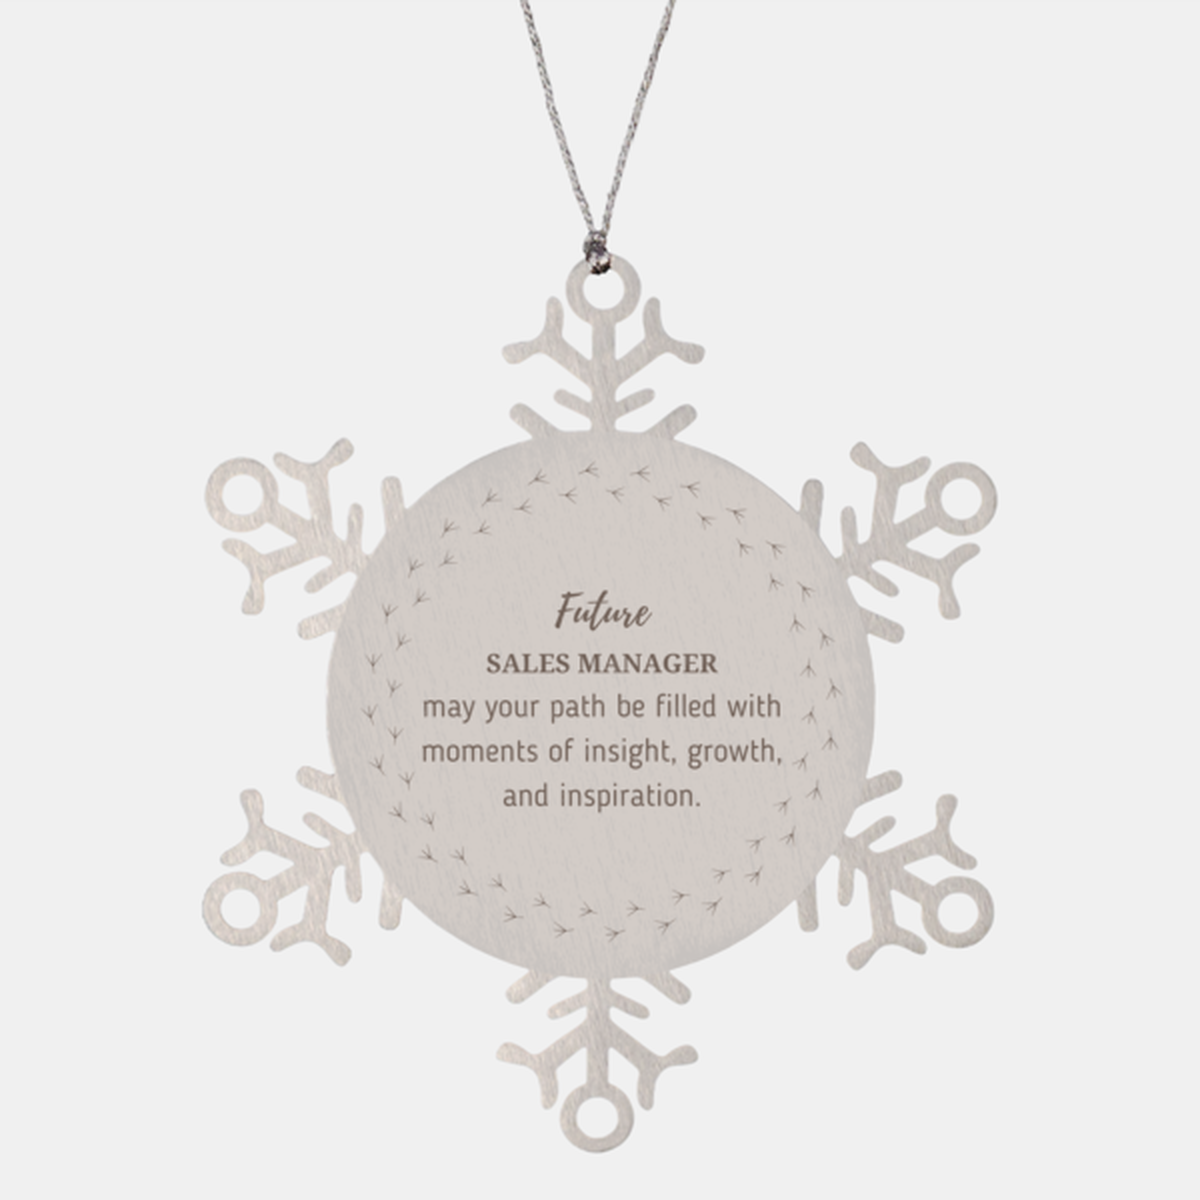 Future Sales Manager Gifts, May your path be filled with moments of insight, Graduation Gifts for New Sales Manager, Christmas Unique Snowflake Ornament For Men, Women, Friends